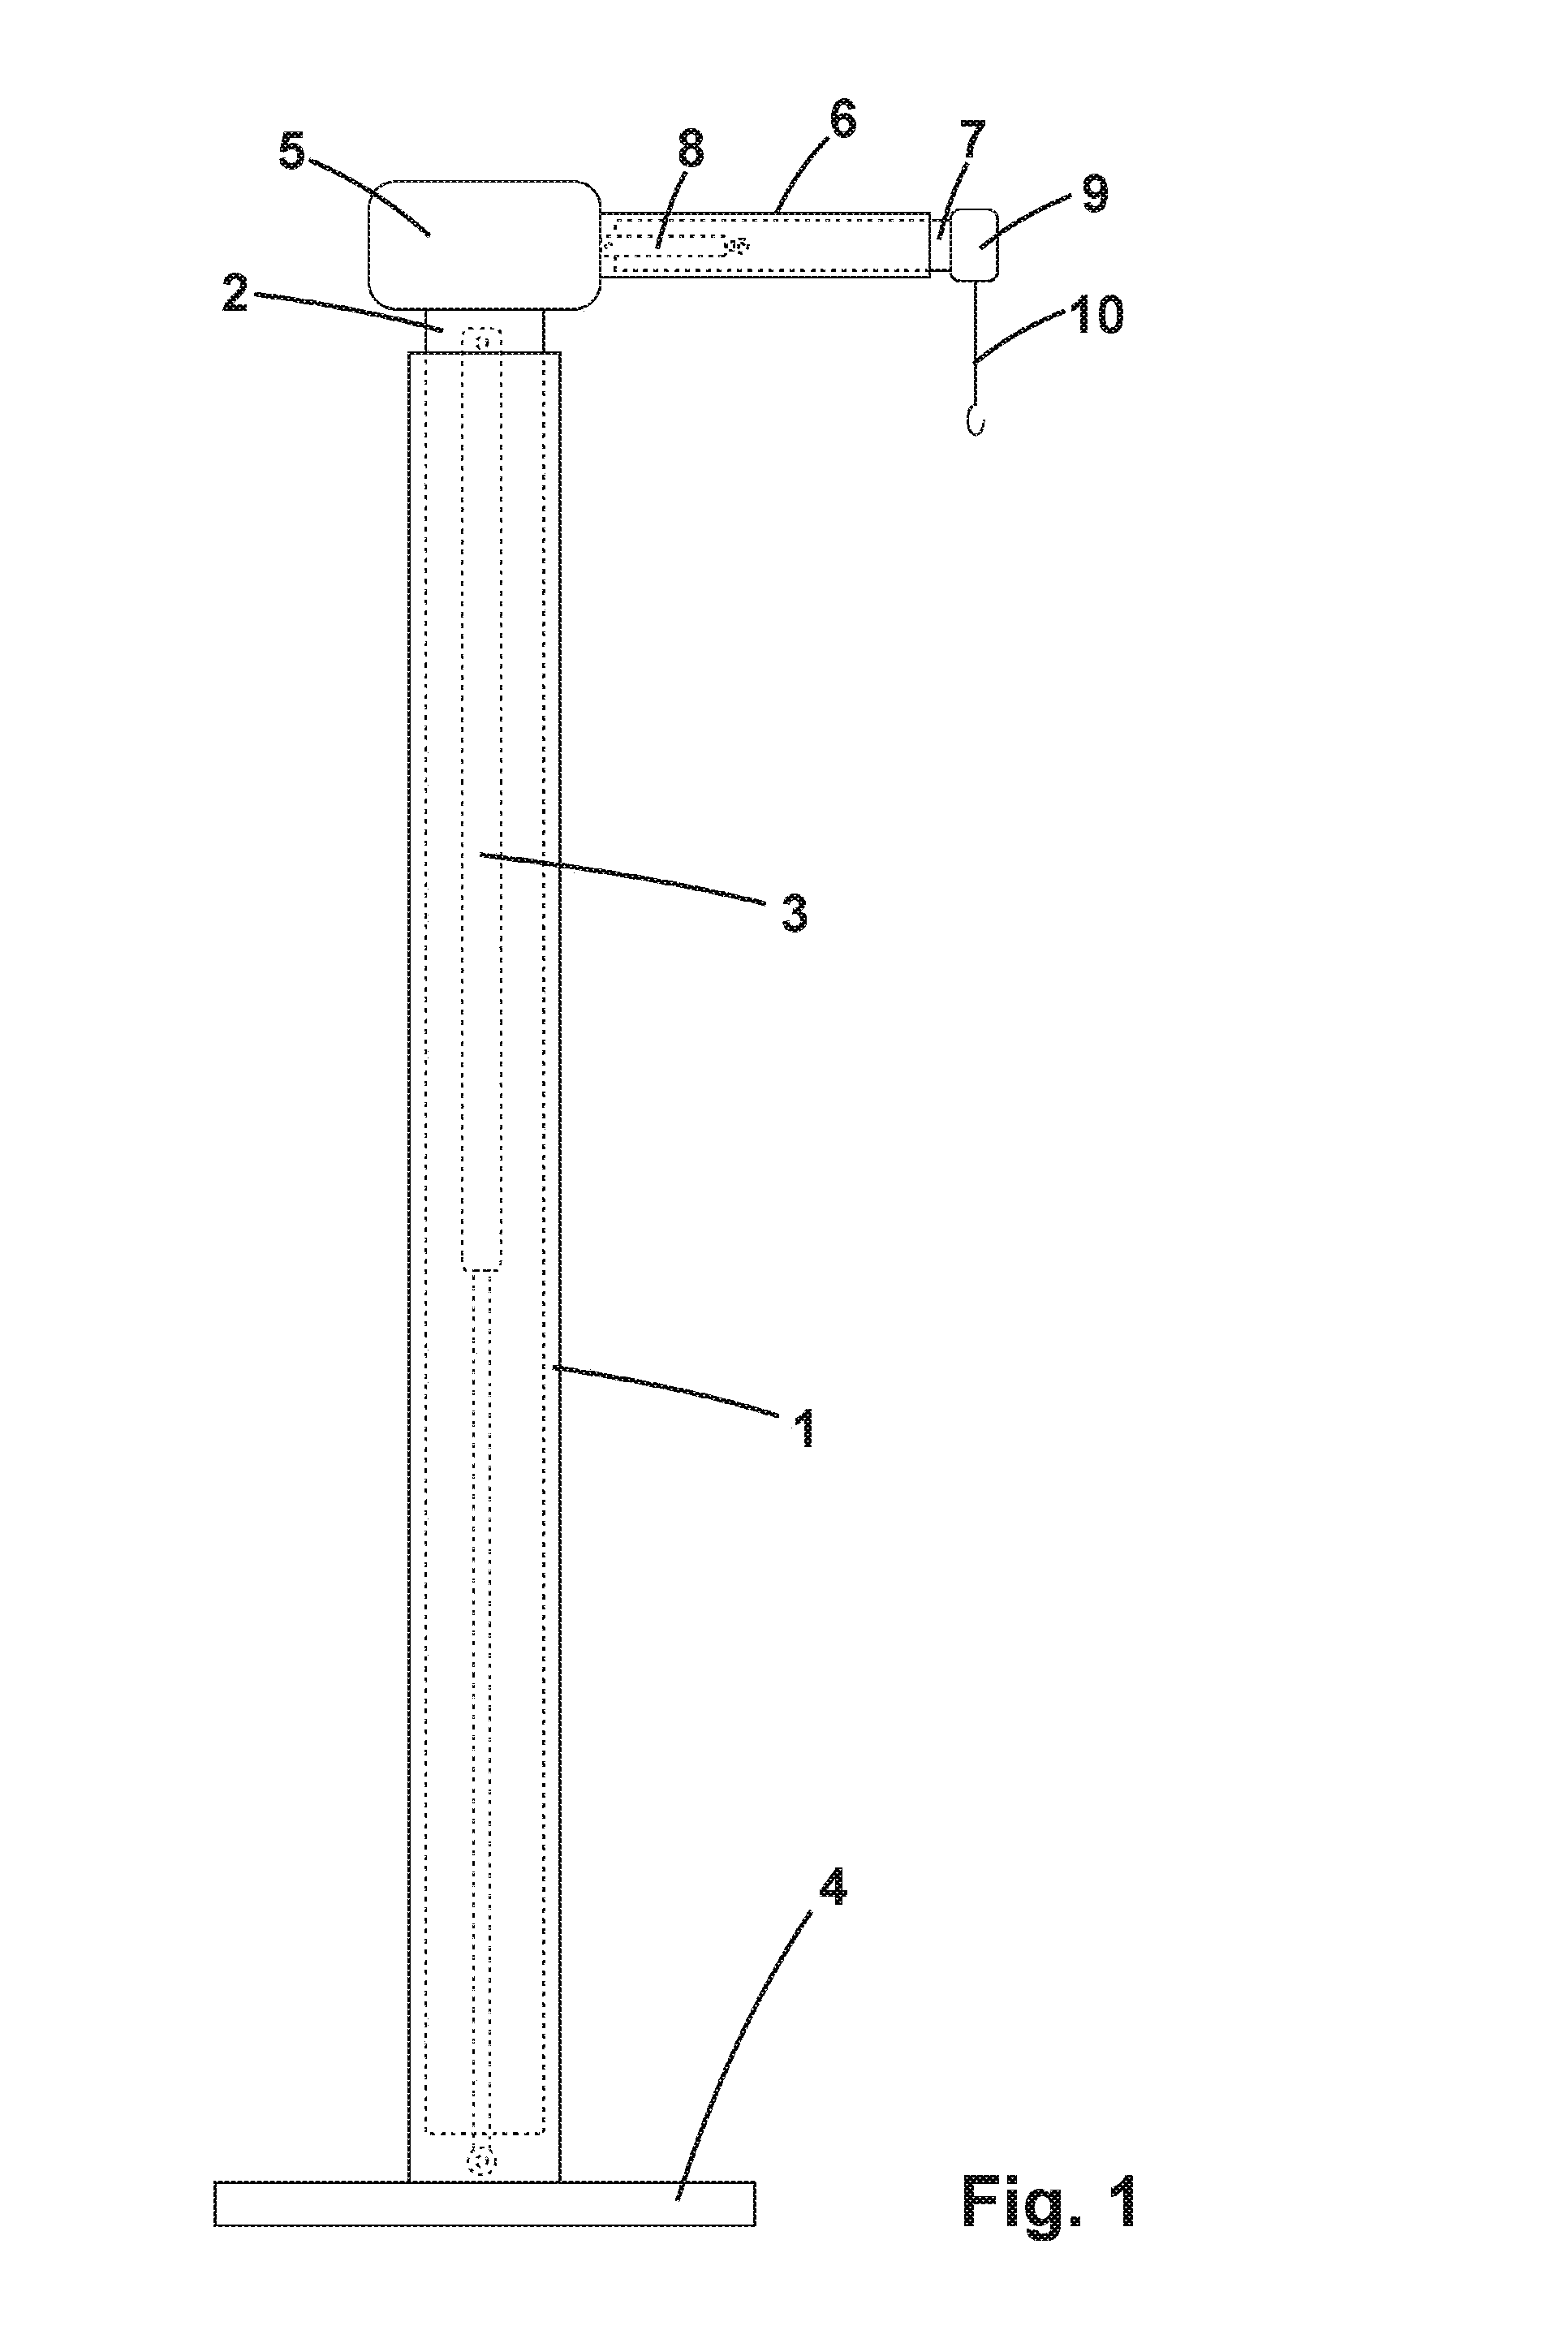 Self-Climbing Telescopic Crane and Method for Mounting Pre-Fabricated Concrete Towers